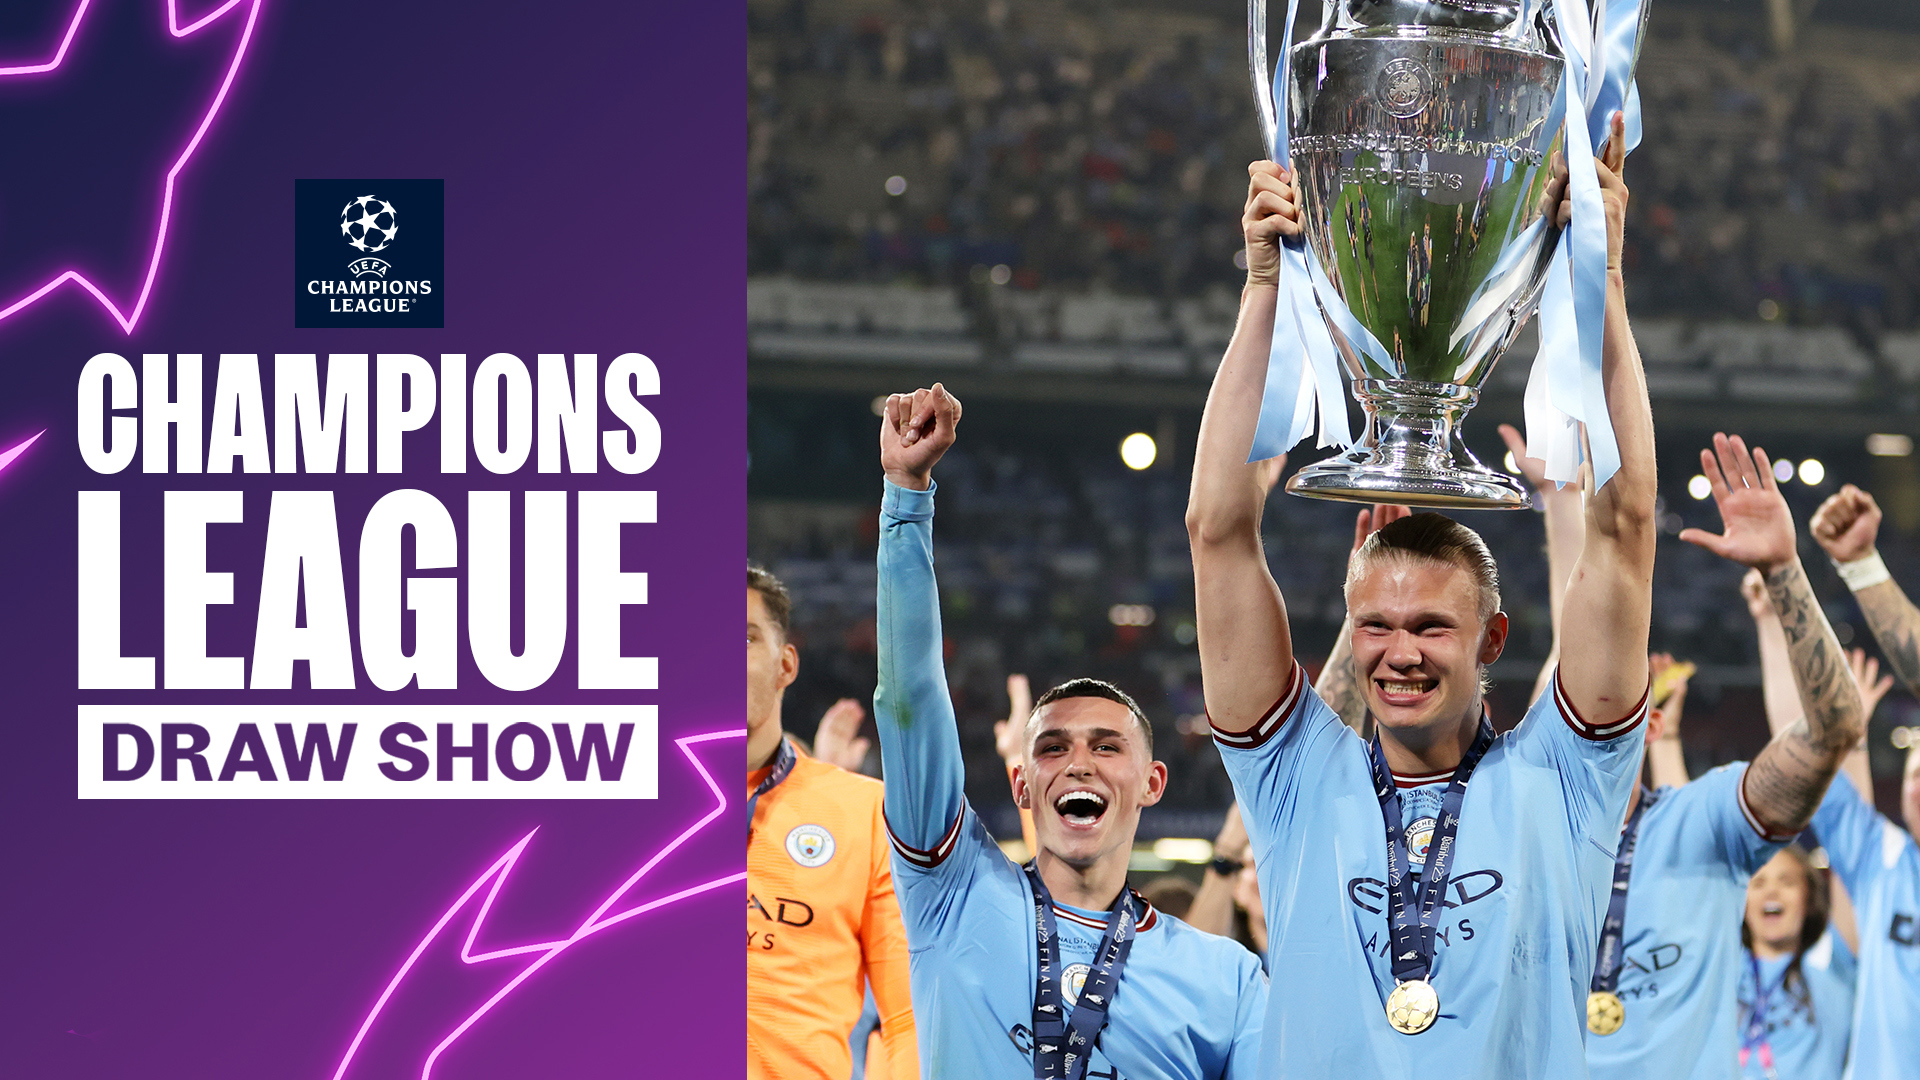 Matchday Live guests react to UCL group stage draw